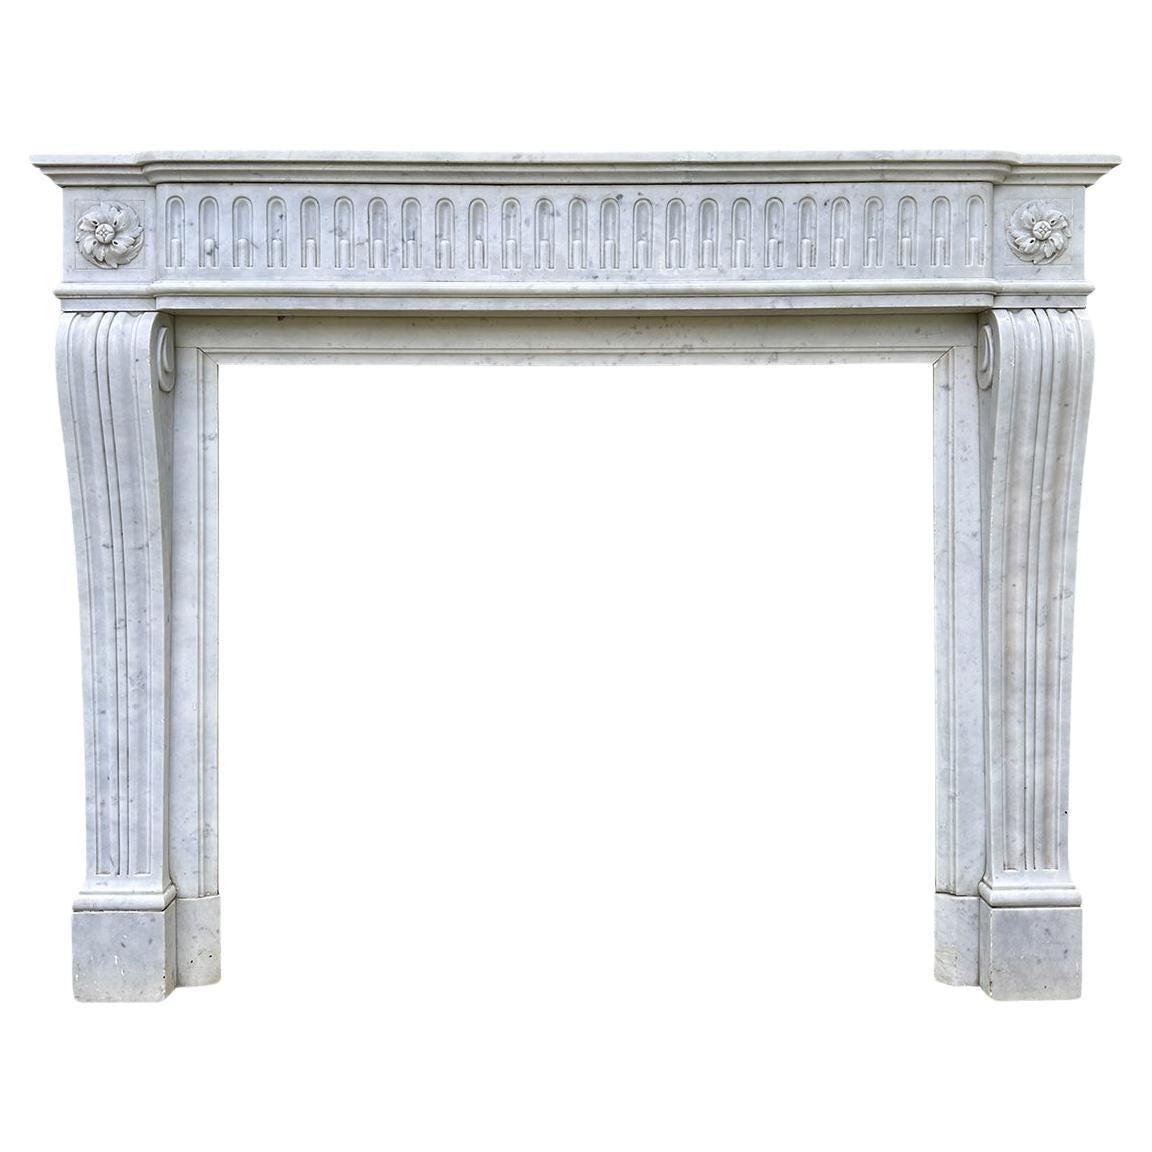 An Antique French Louis XVI Style Carrara Marble Fireplace Mantel  For Sale